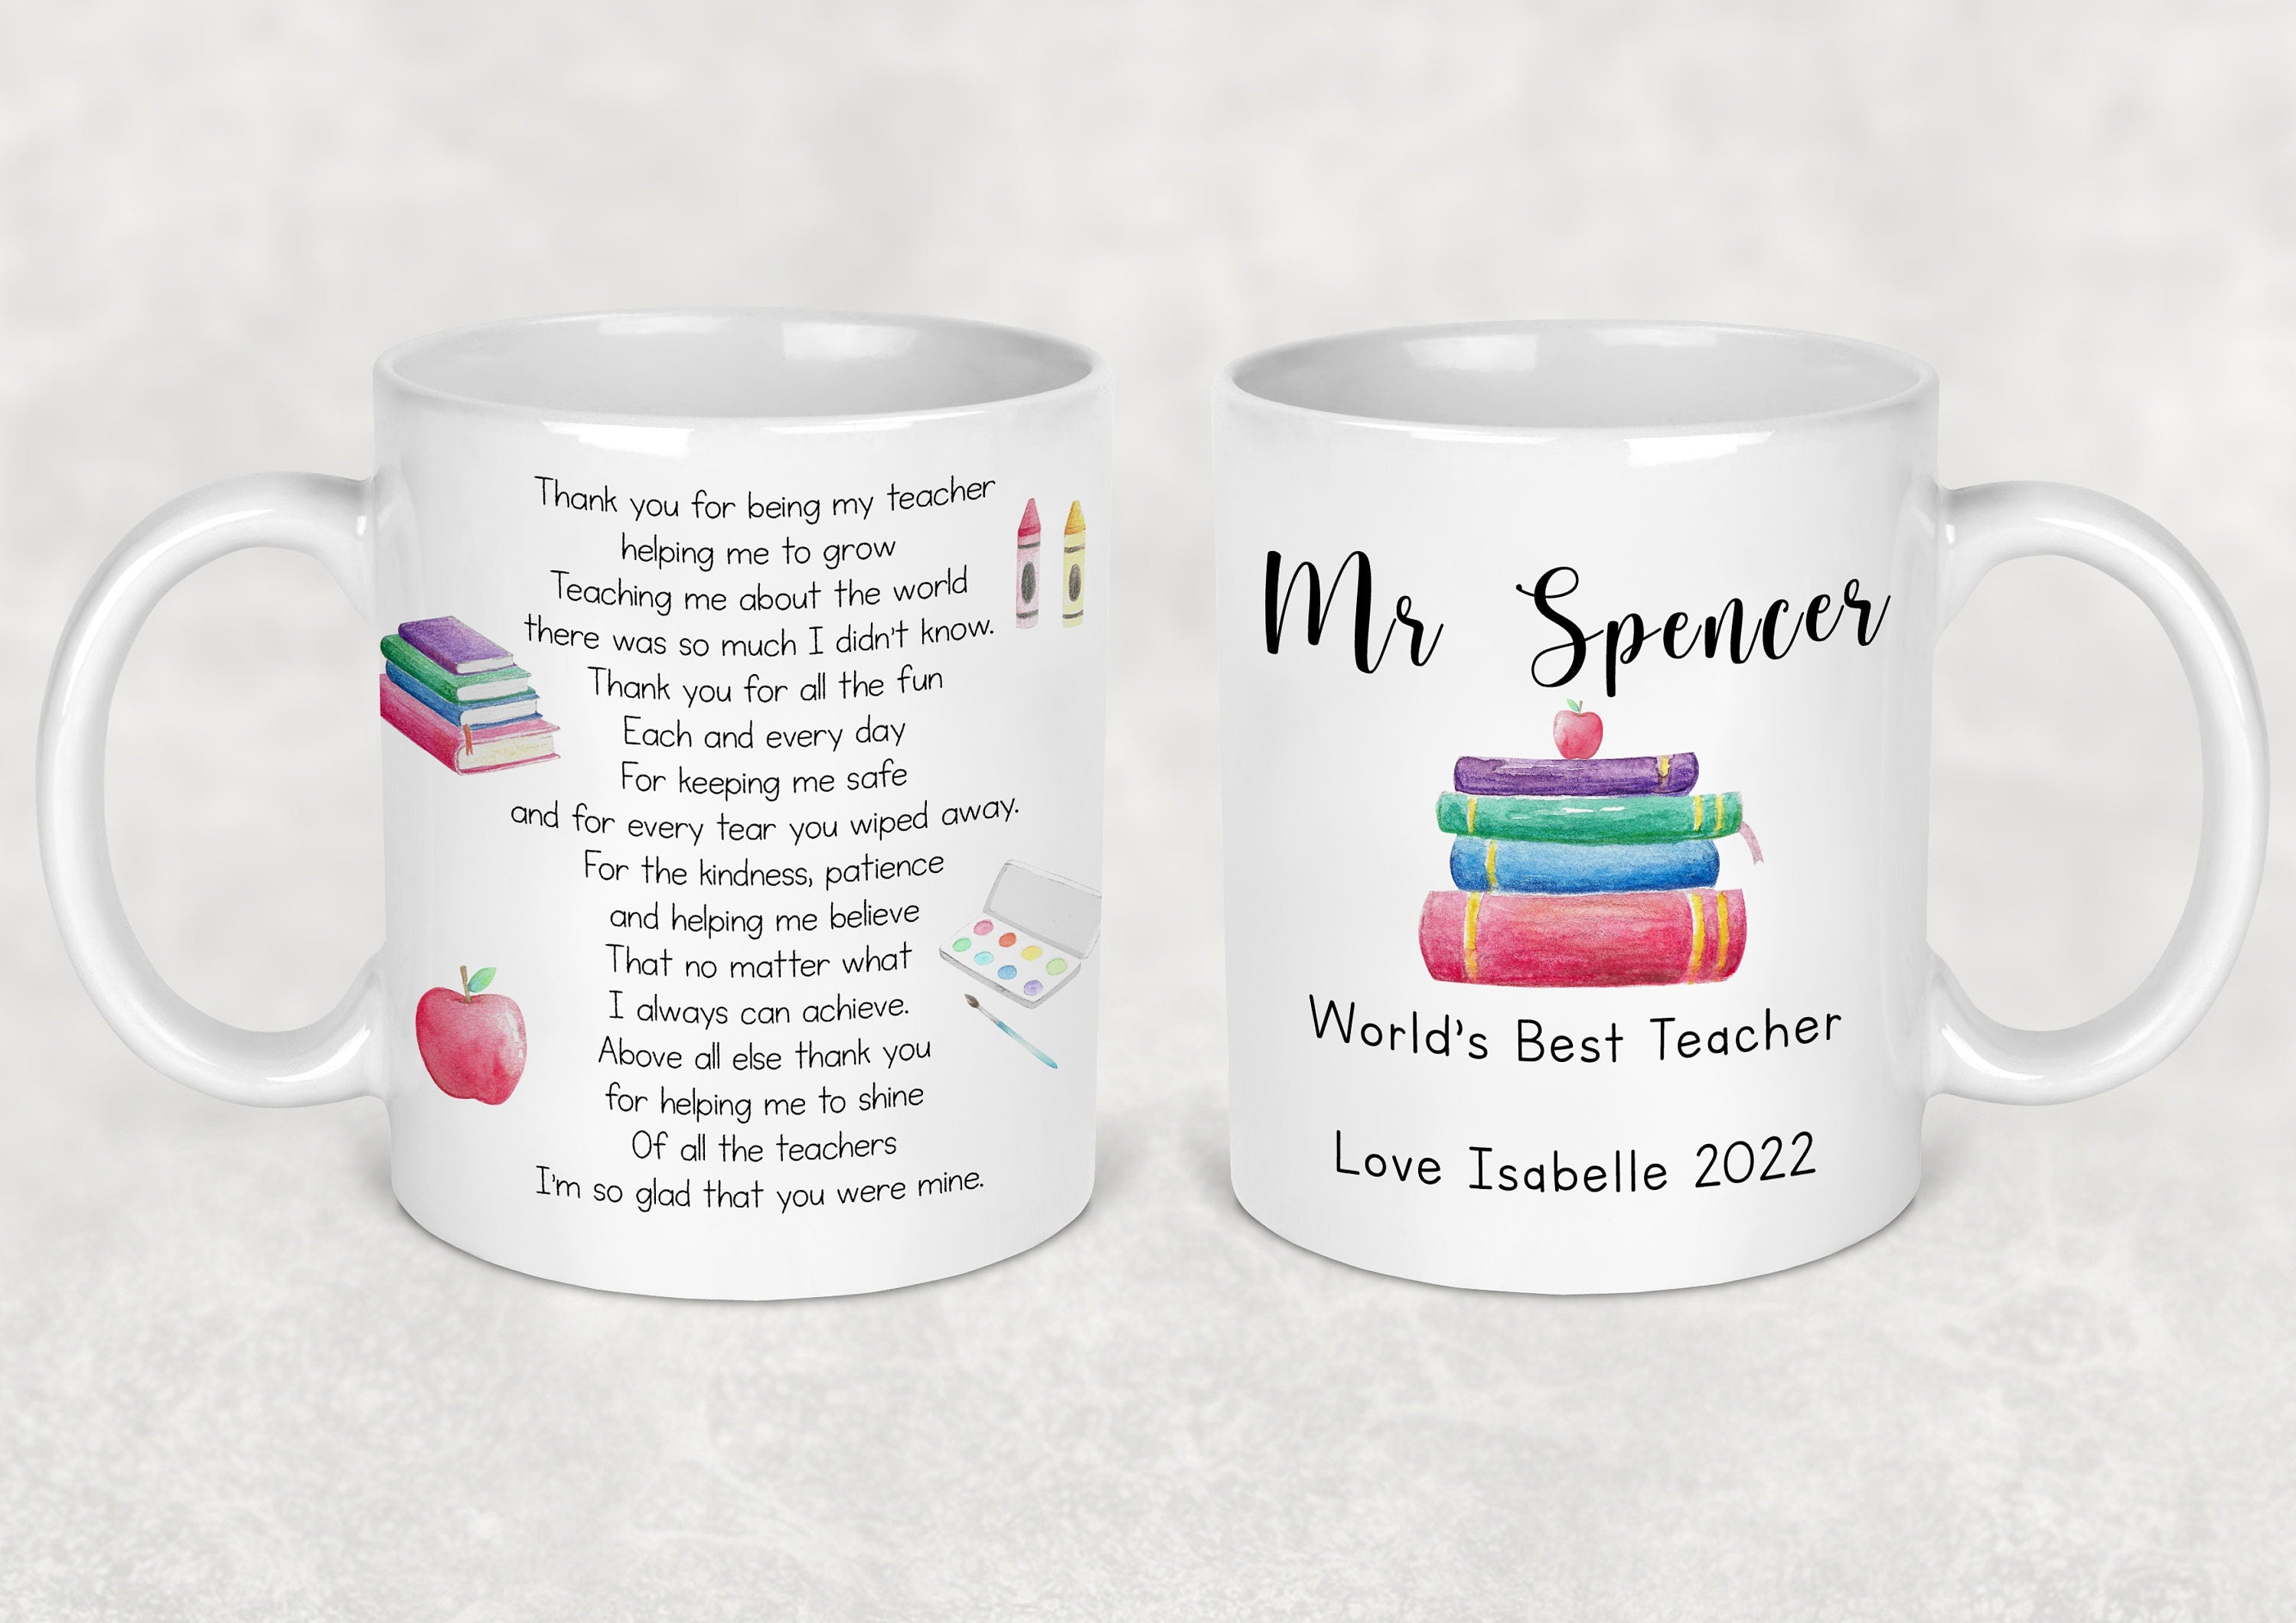 Teachers Day gift Online | Best Gifts for Teacher| Online Teachers Day Gifts  Delivery